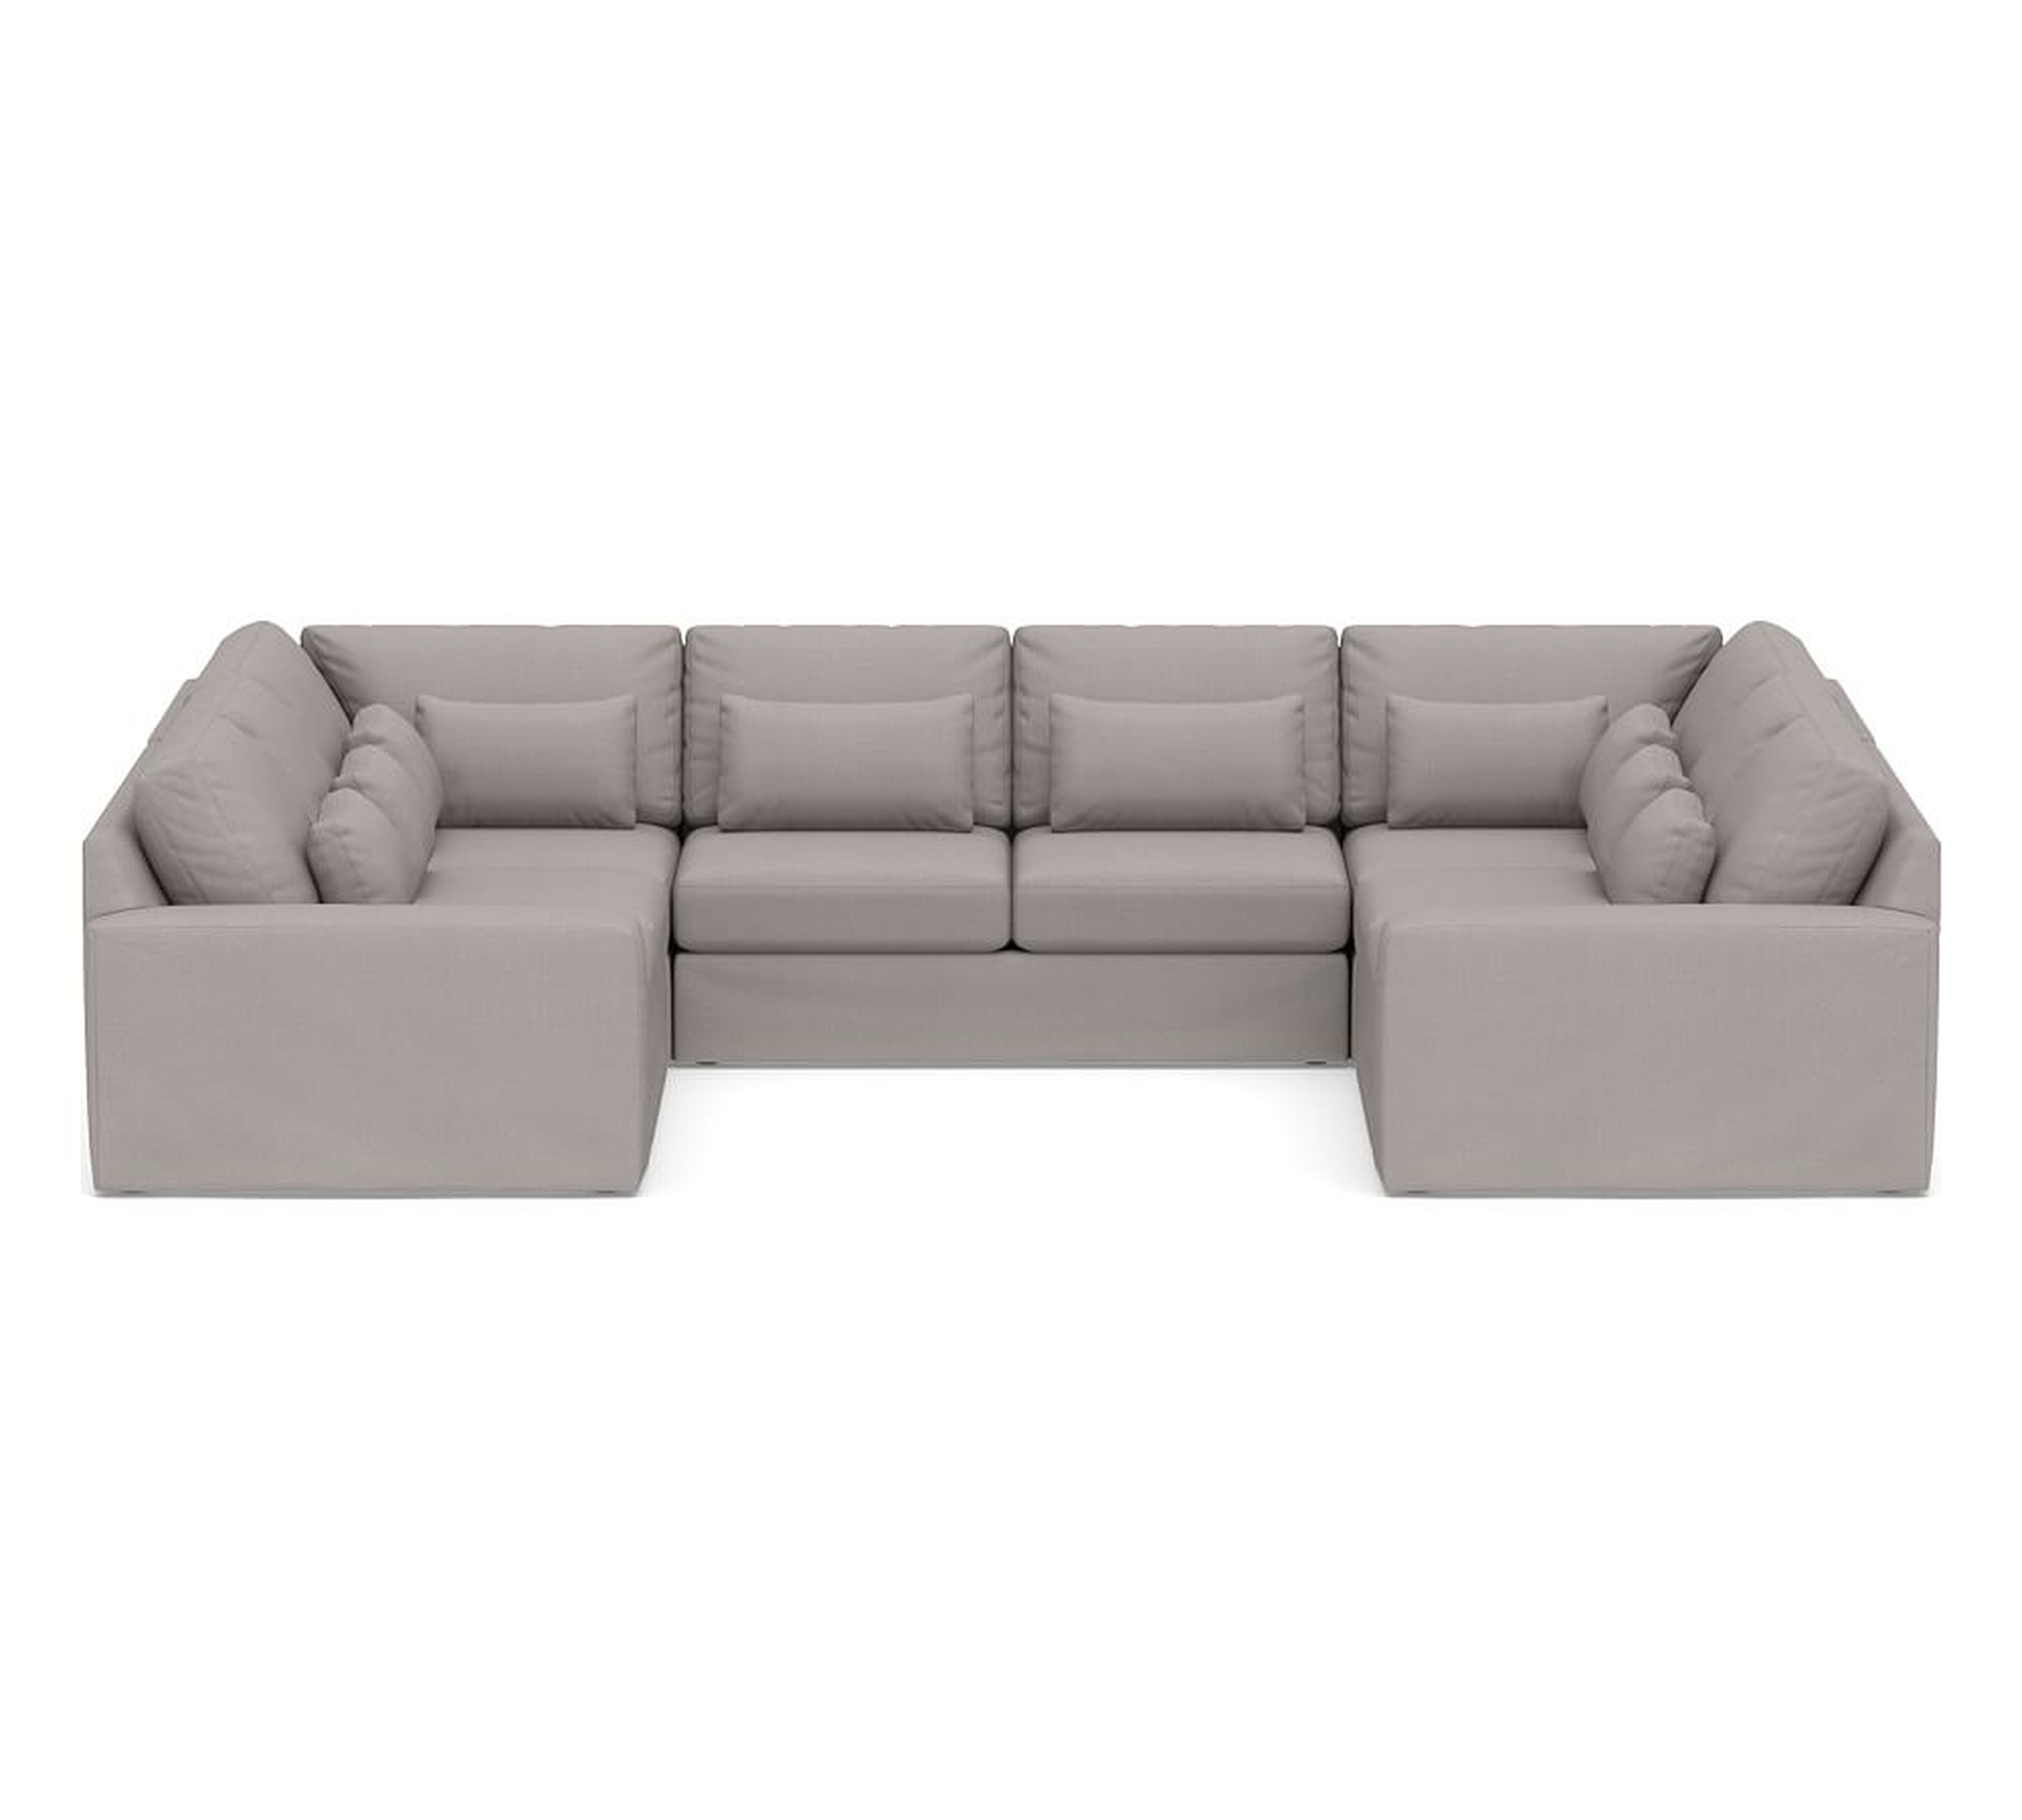 Big Sur Square Arm Slipcovered Deep Seat U-Loveseat Sectional, Down Blend Wrapped Cushions, Belgian Linen Light Gray - Pottery Barn